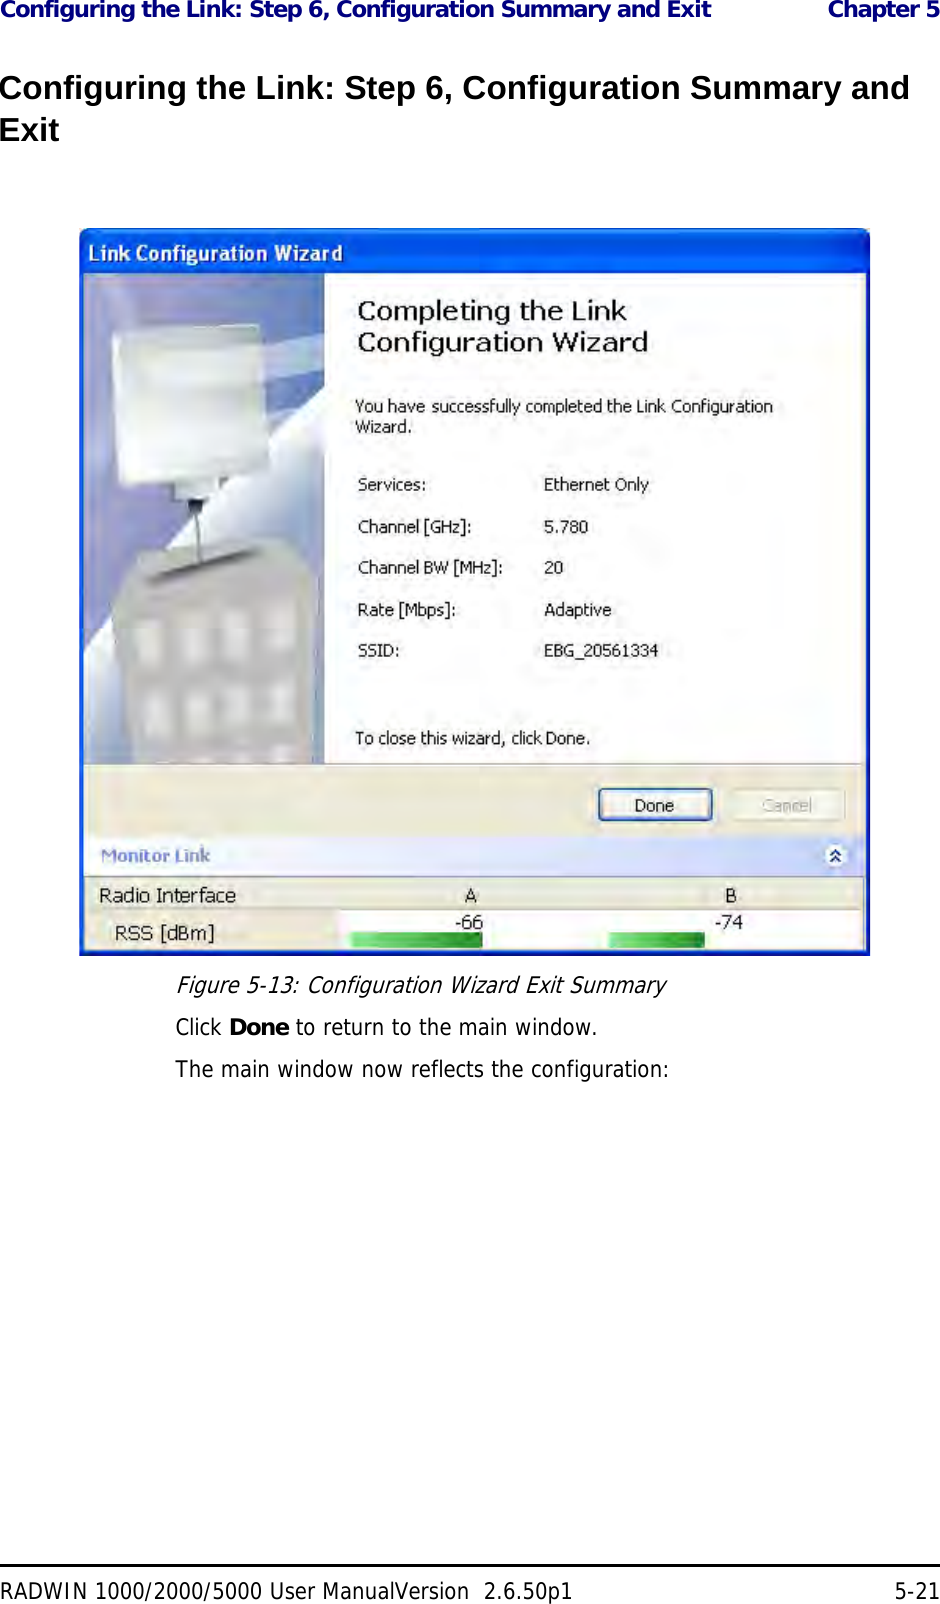 Configuring the Link: Step 6, Configuration Summary and Exit  Chapter 5RADWIN 1000/2000/5000 User ManualVersion  2.6.50p1 5-21Configuring the Link: Step 6, Configuration Summary and ExitFigure 5-13: Configuration Wizard Exit Summary Click Done to return to the main window.The main window now reflects the configuration: